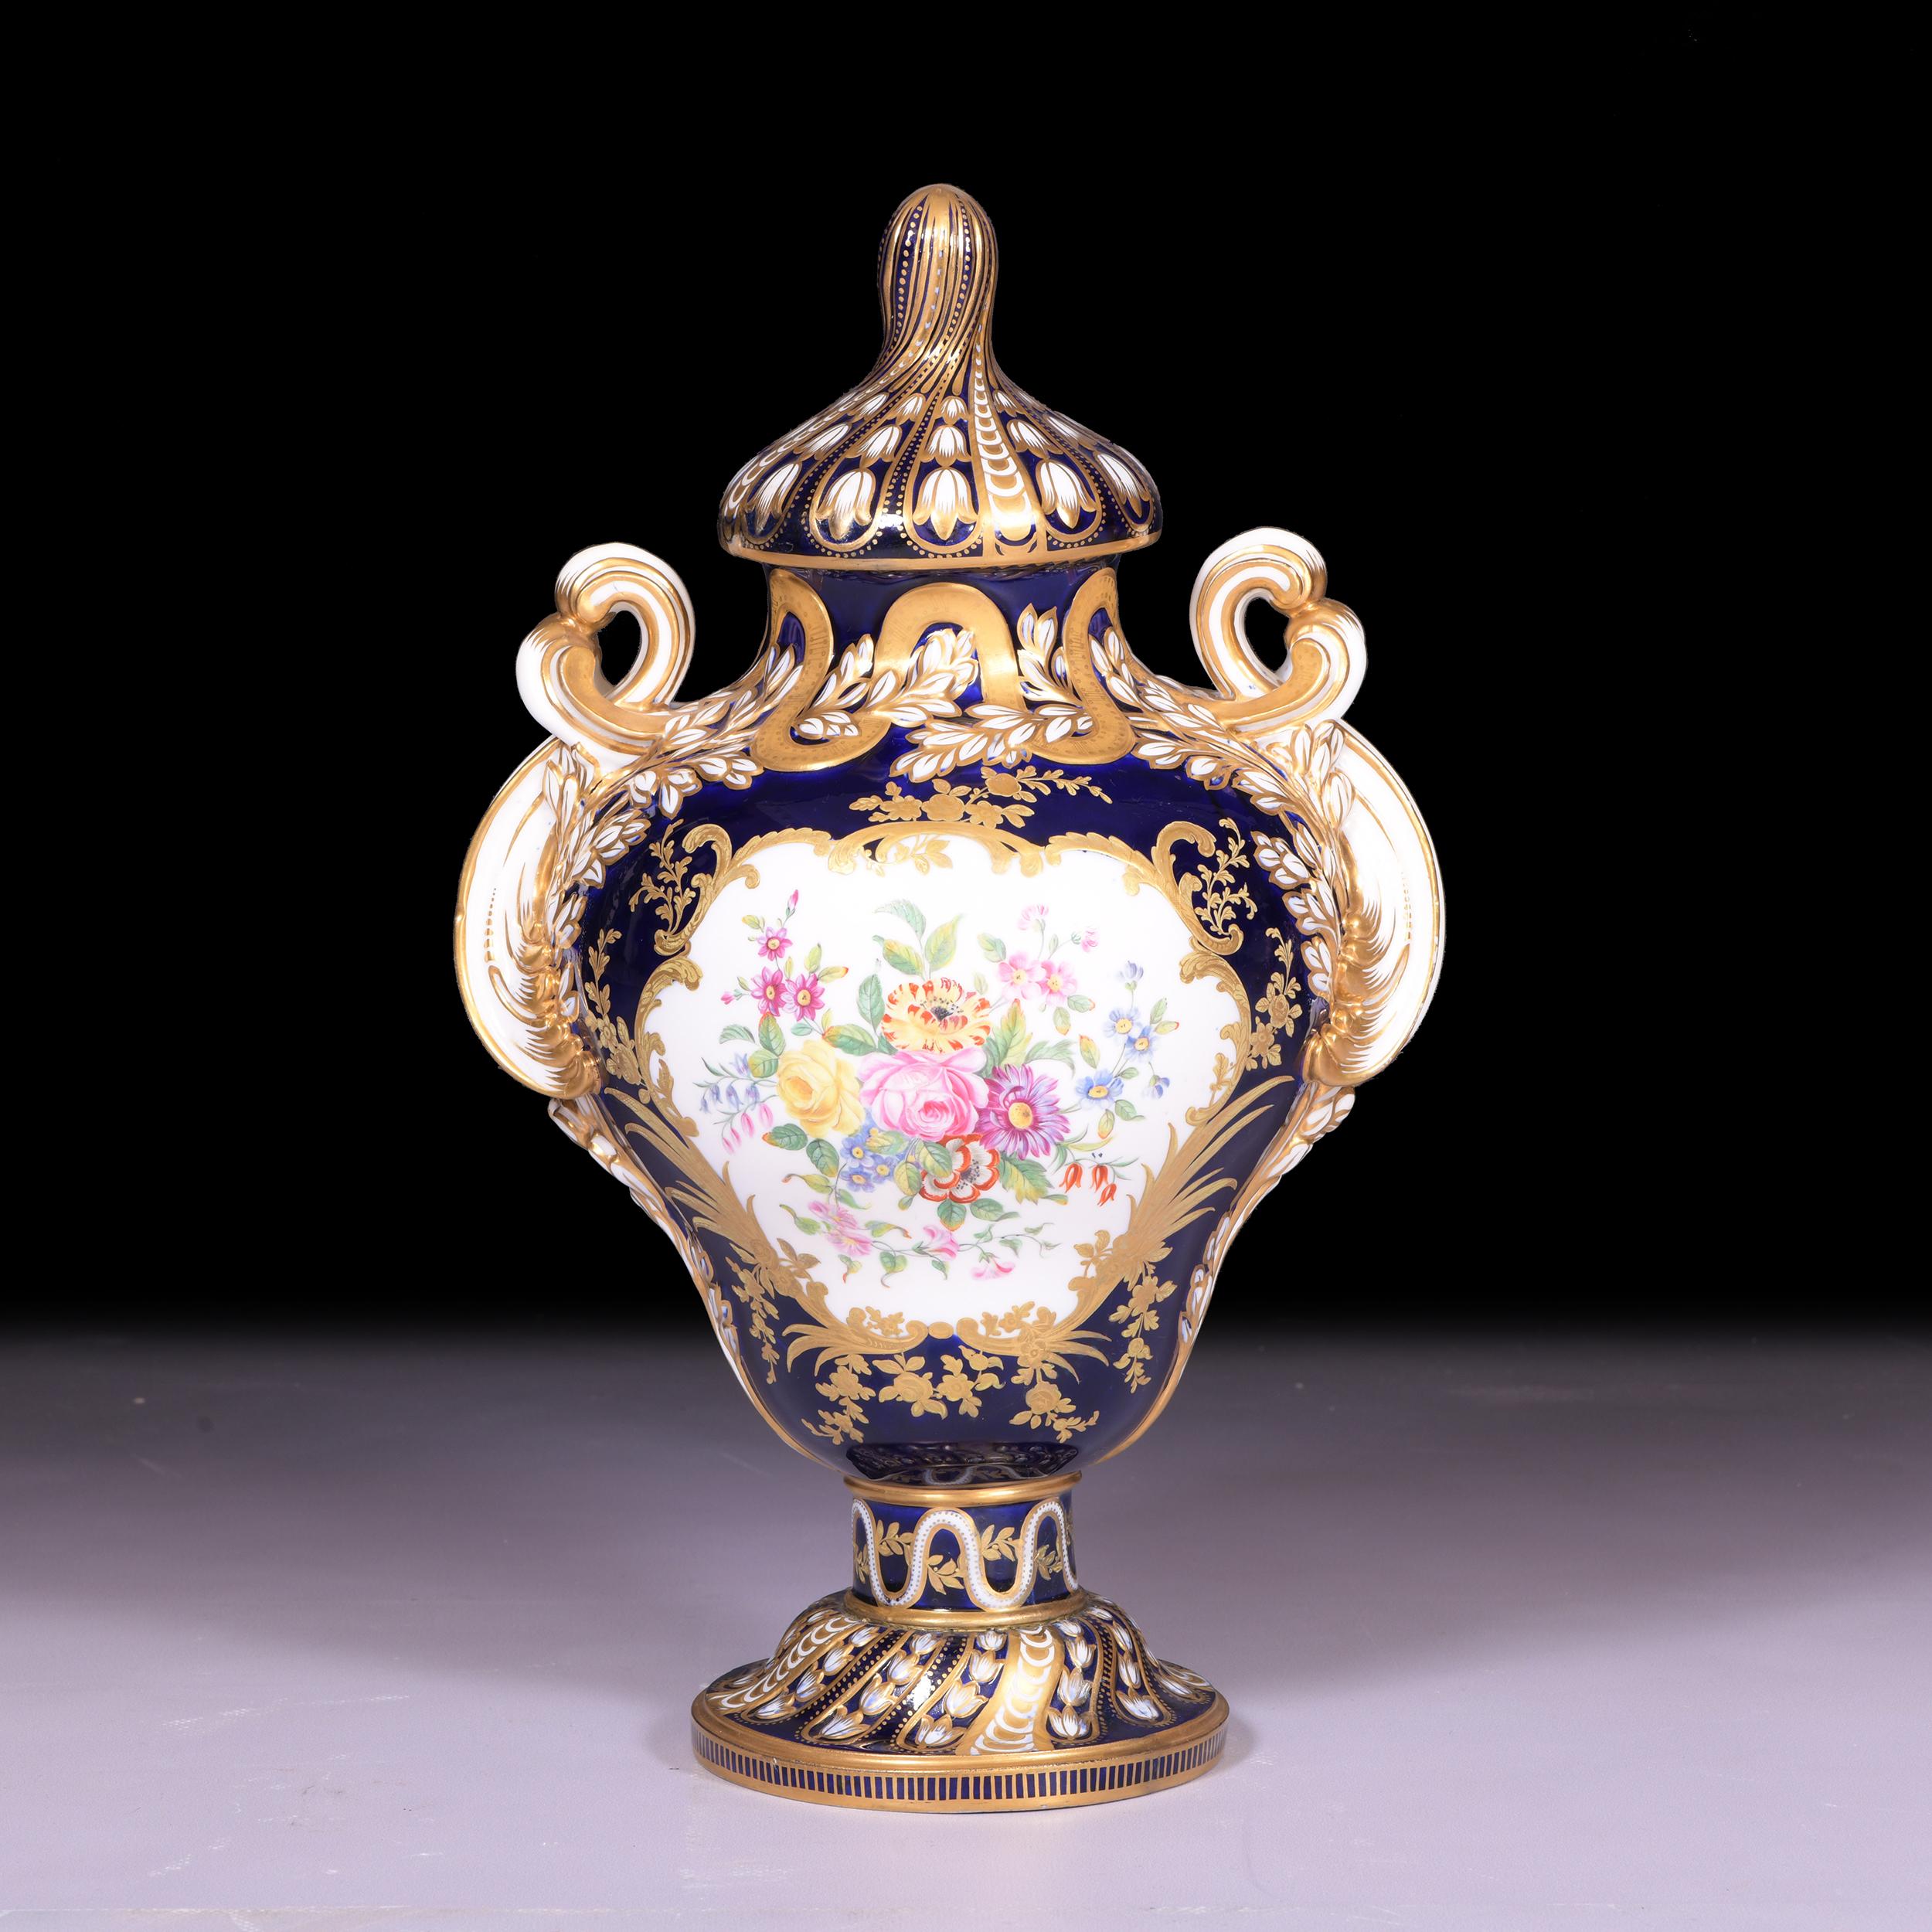 A magnificent mid 19th century twin handled centre vase by Minton. Painted with exotic birds and with blue, pink and gilt handles and borders. The type is known as Sneyd, number 301, from the design record books.

Exhibited In 1849 at The